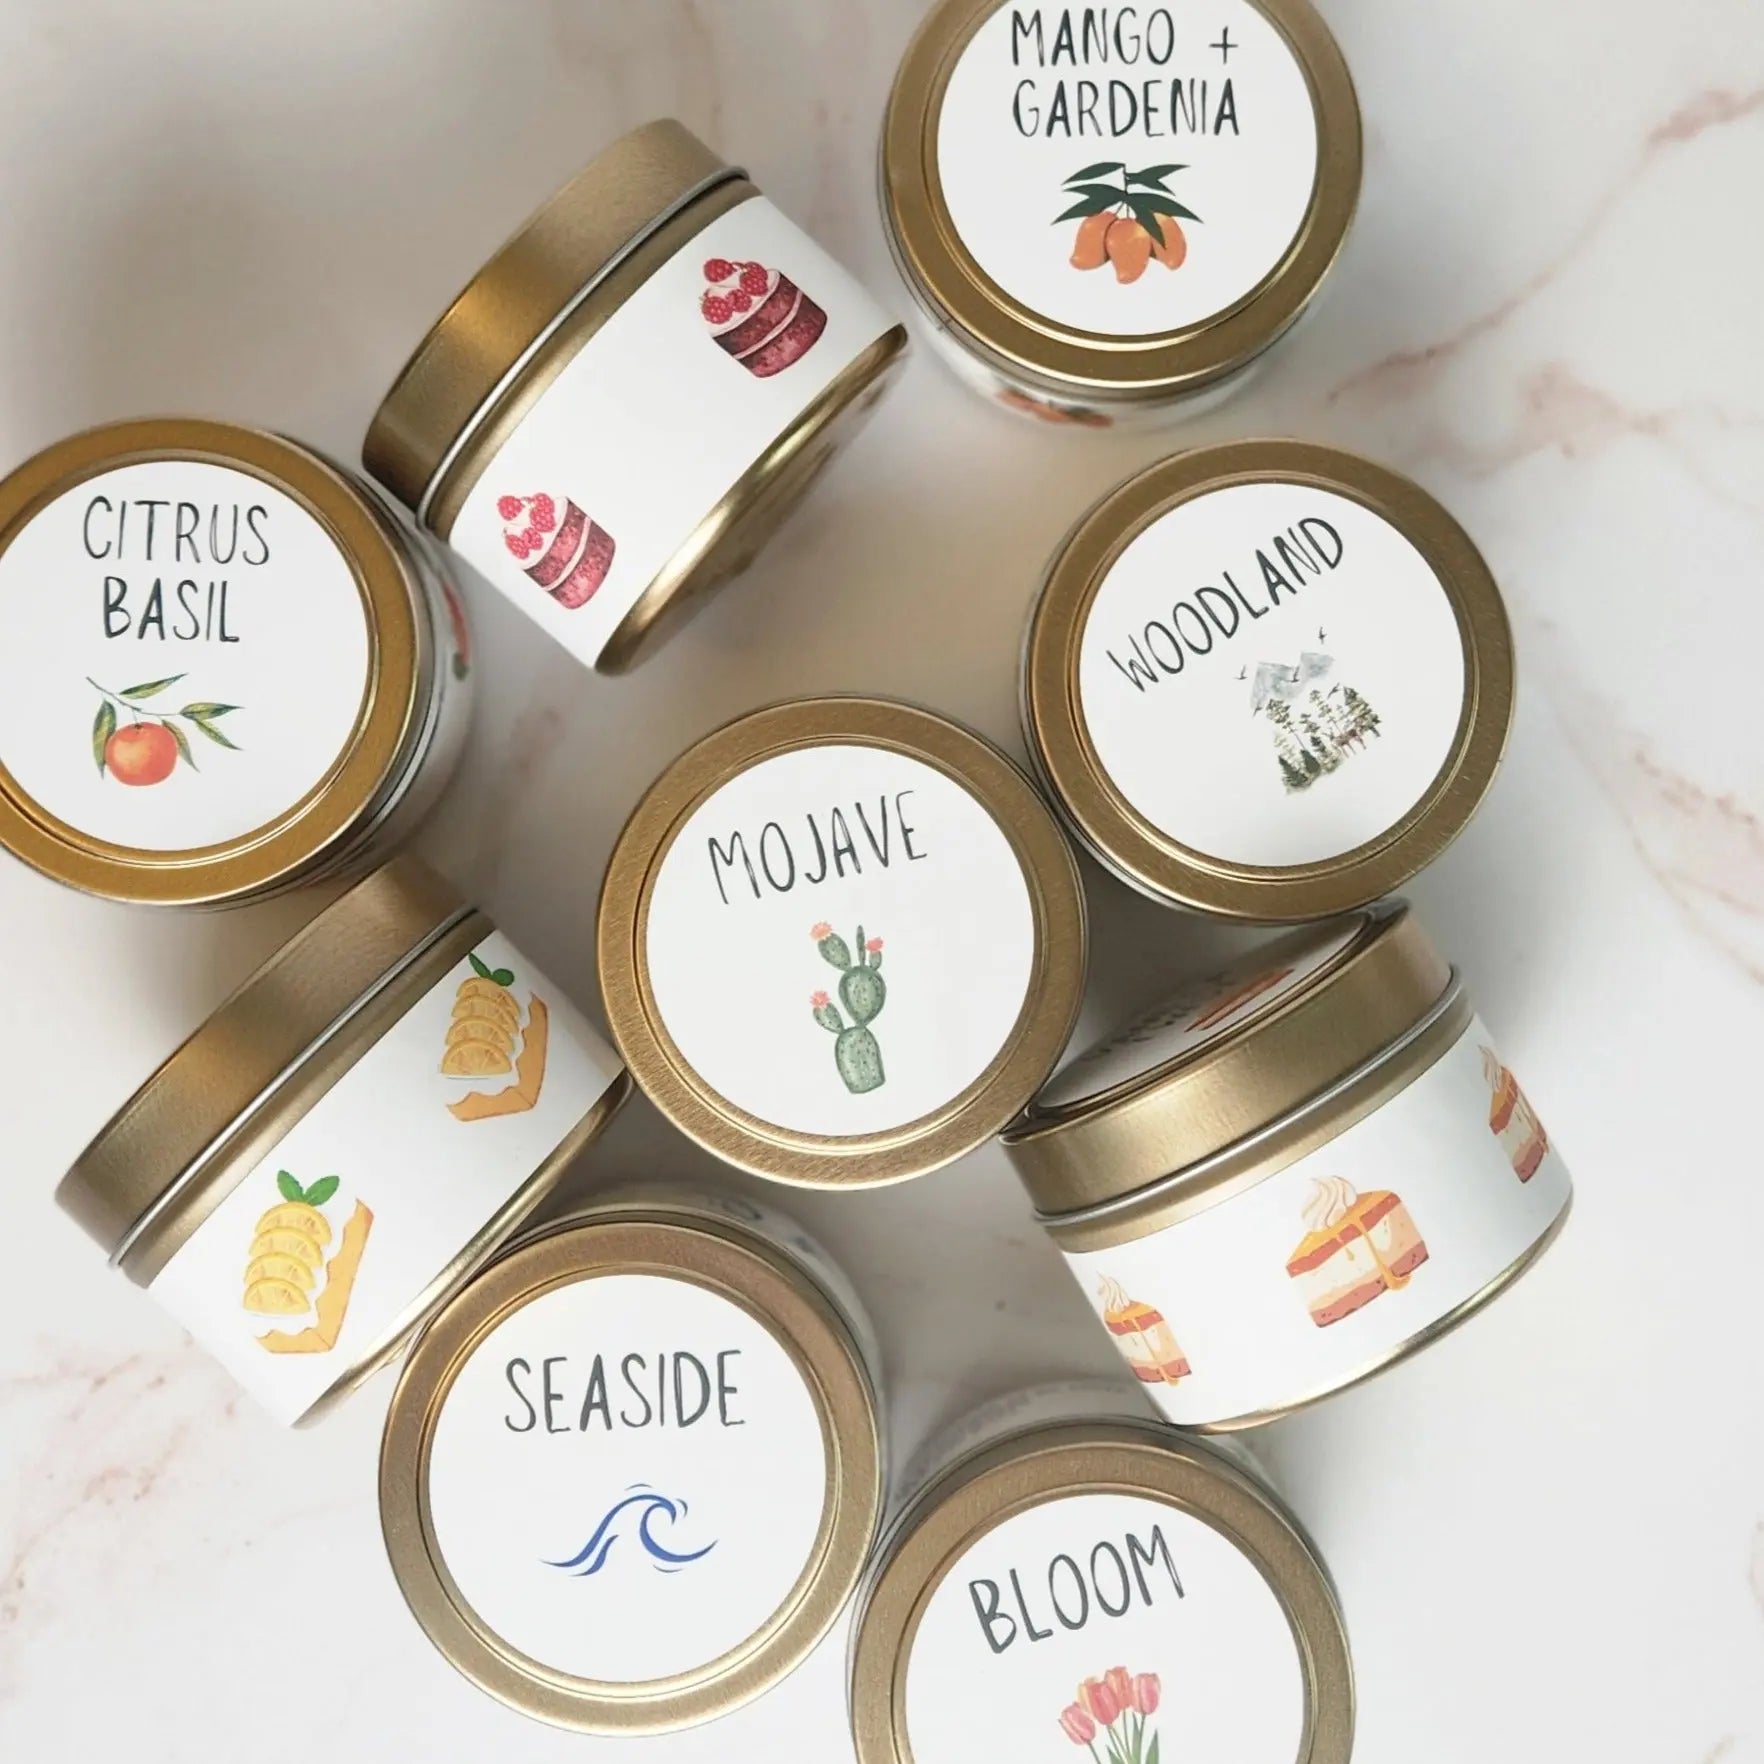 Candle tins, soy wax candles